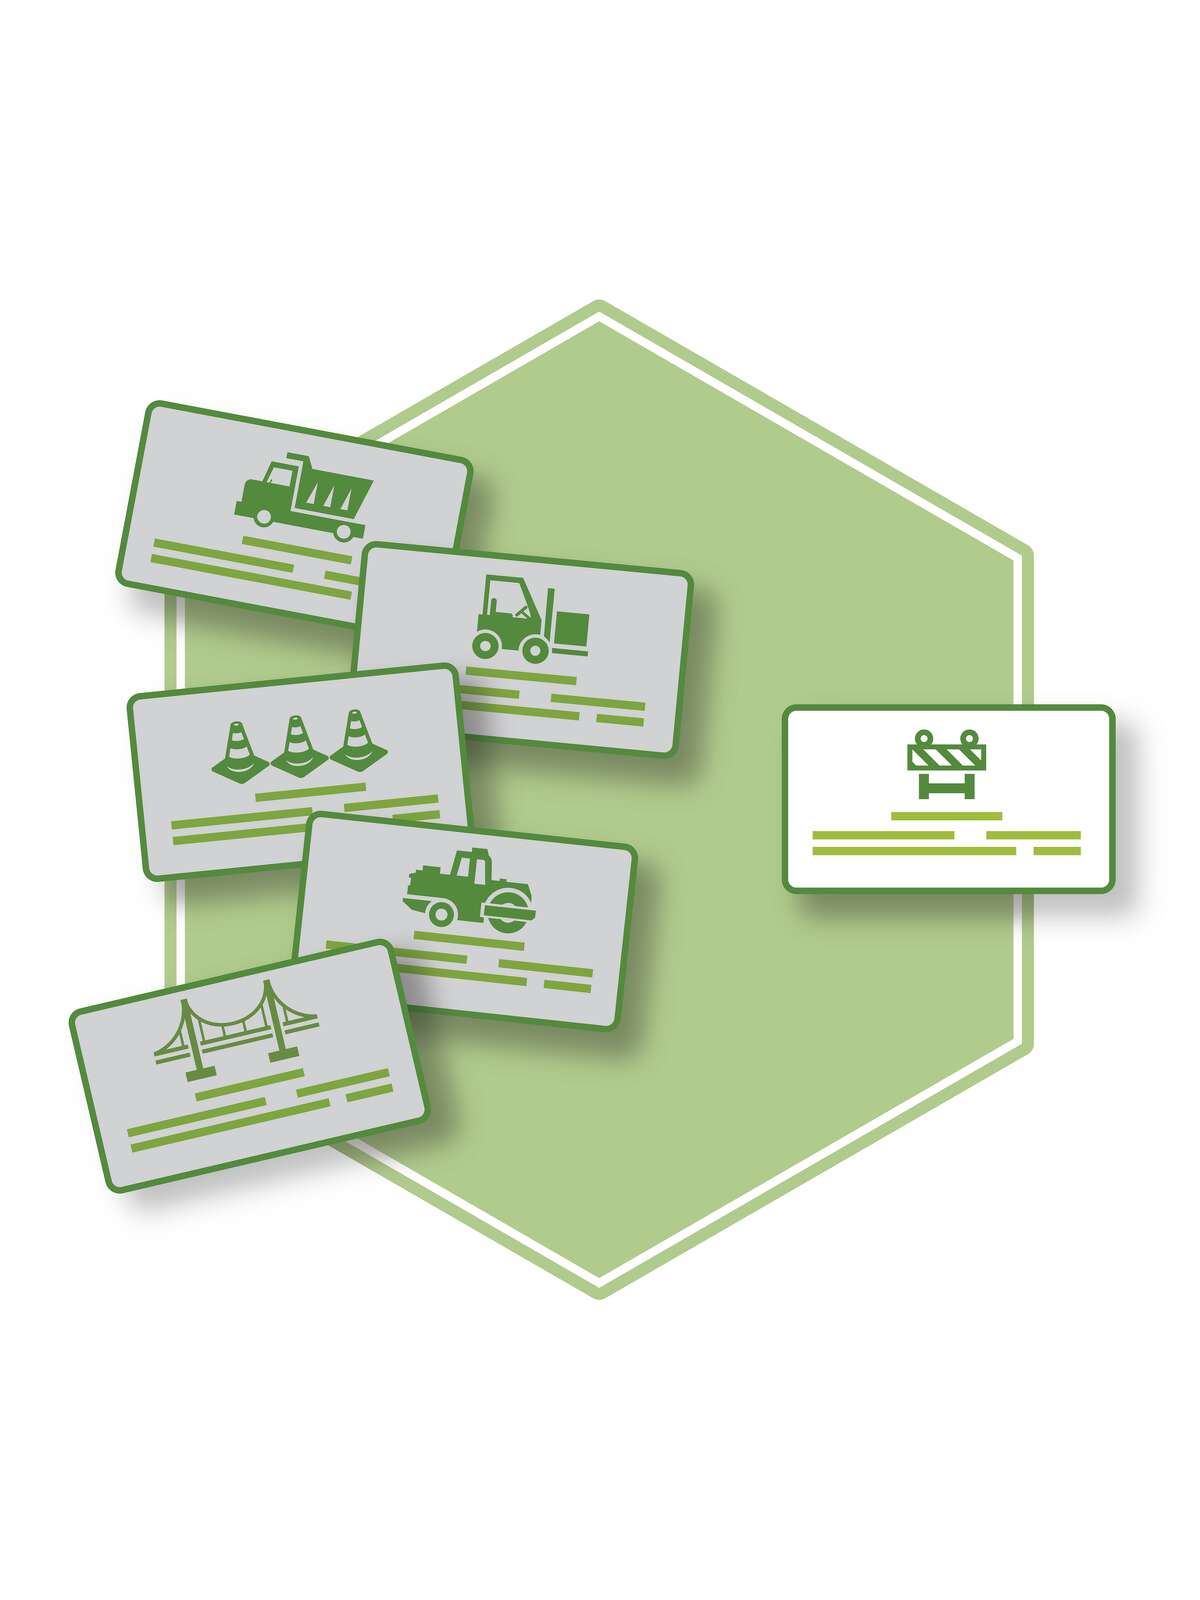 Illustration of third process, business cards with infrastrcuture tools on them, on highlighted